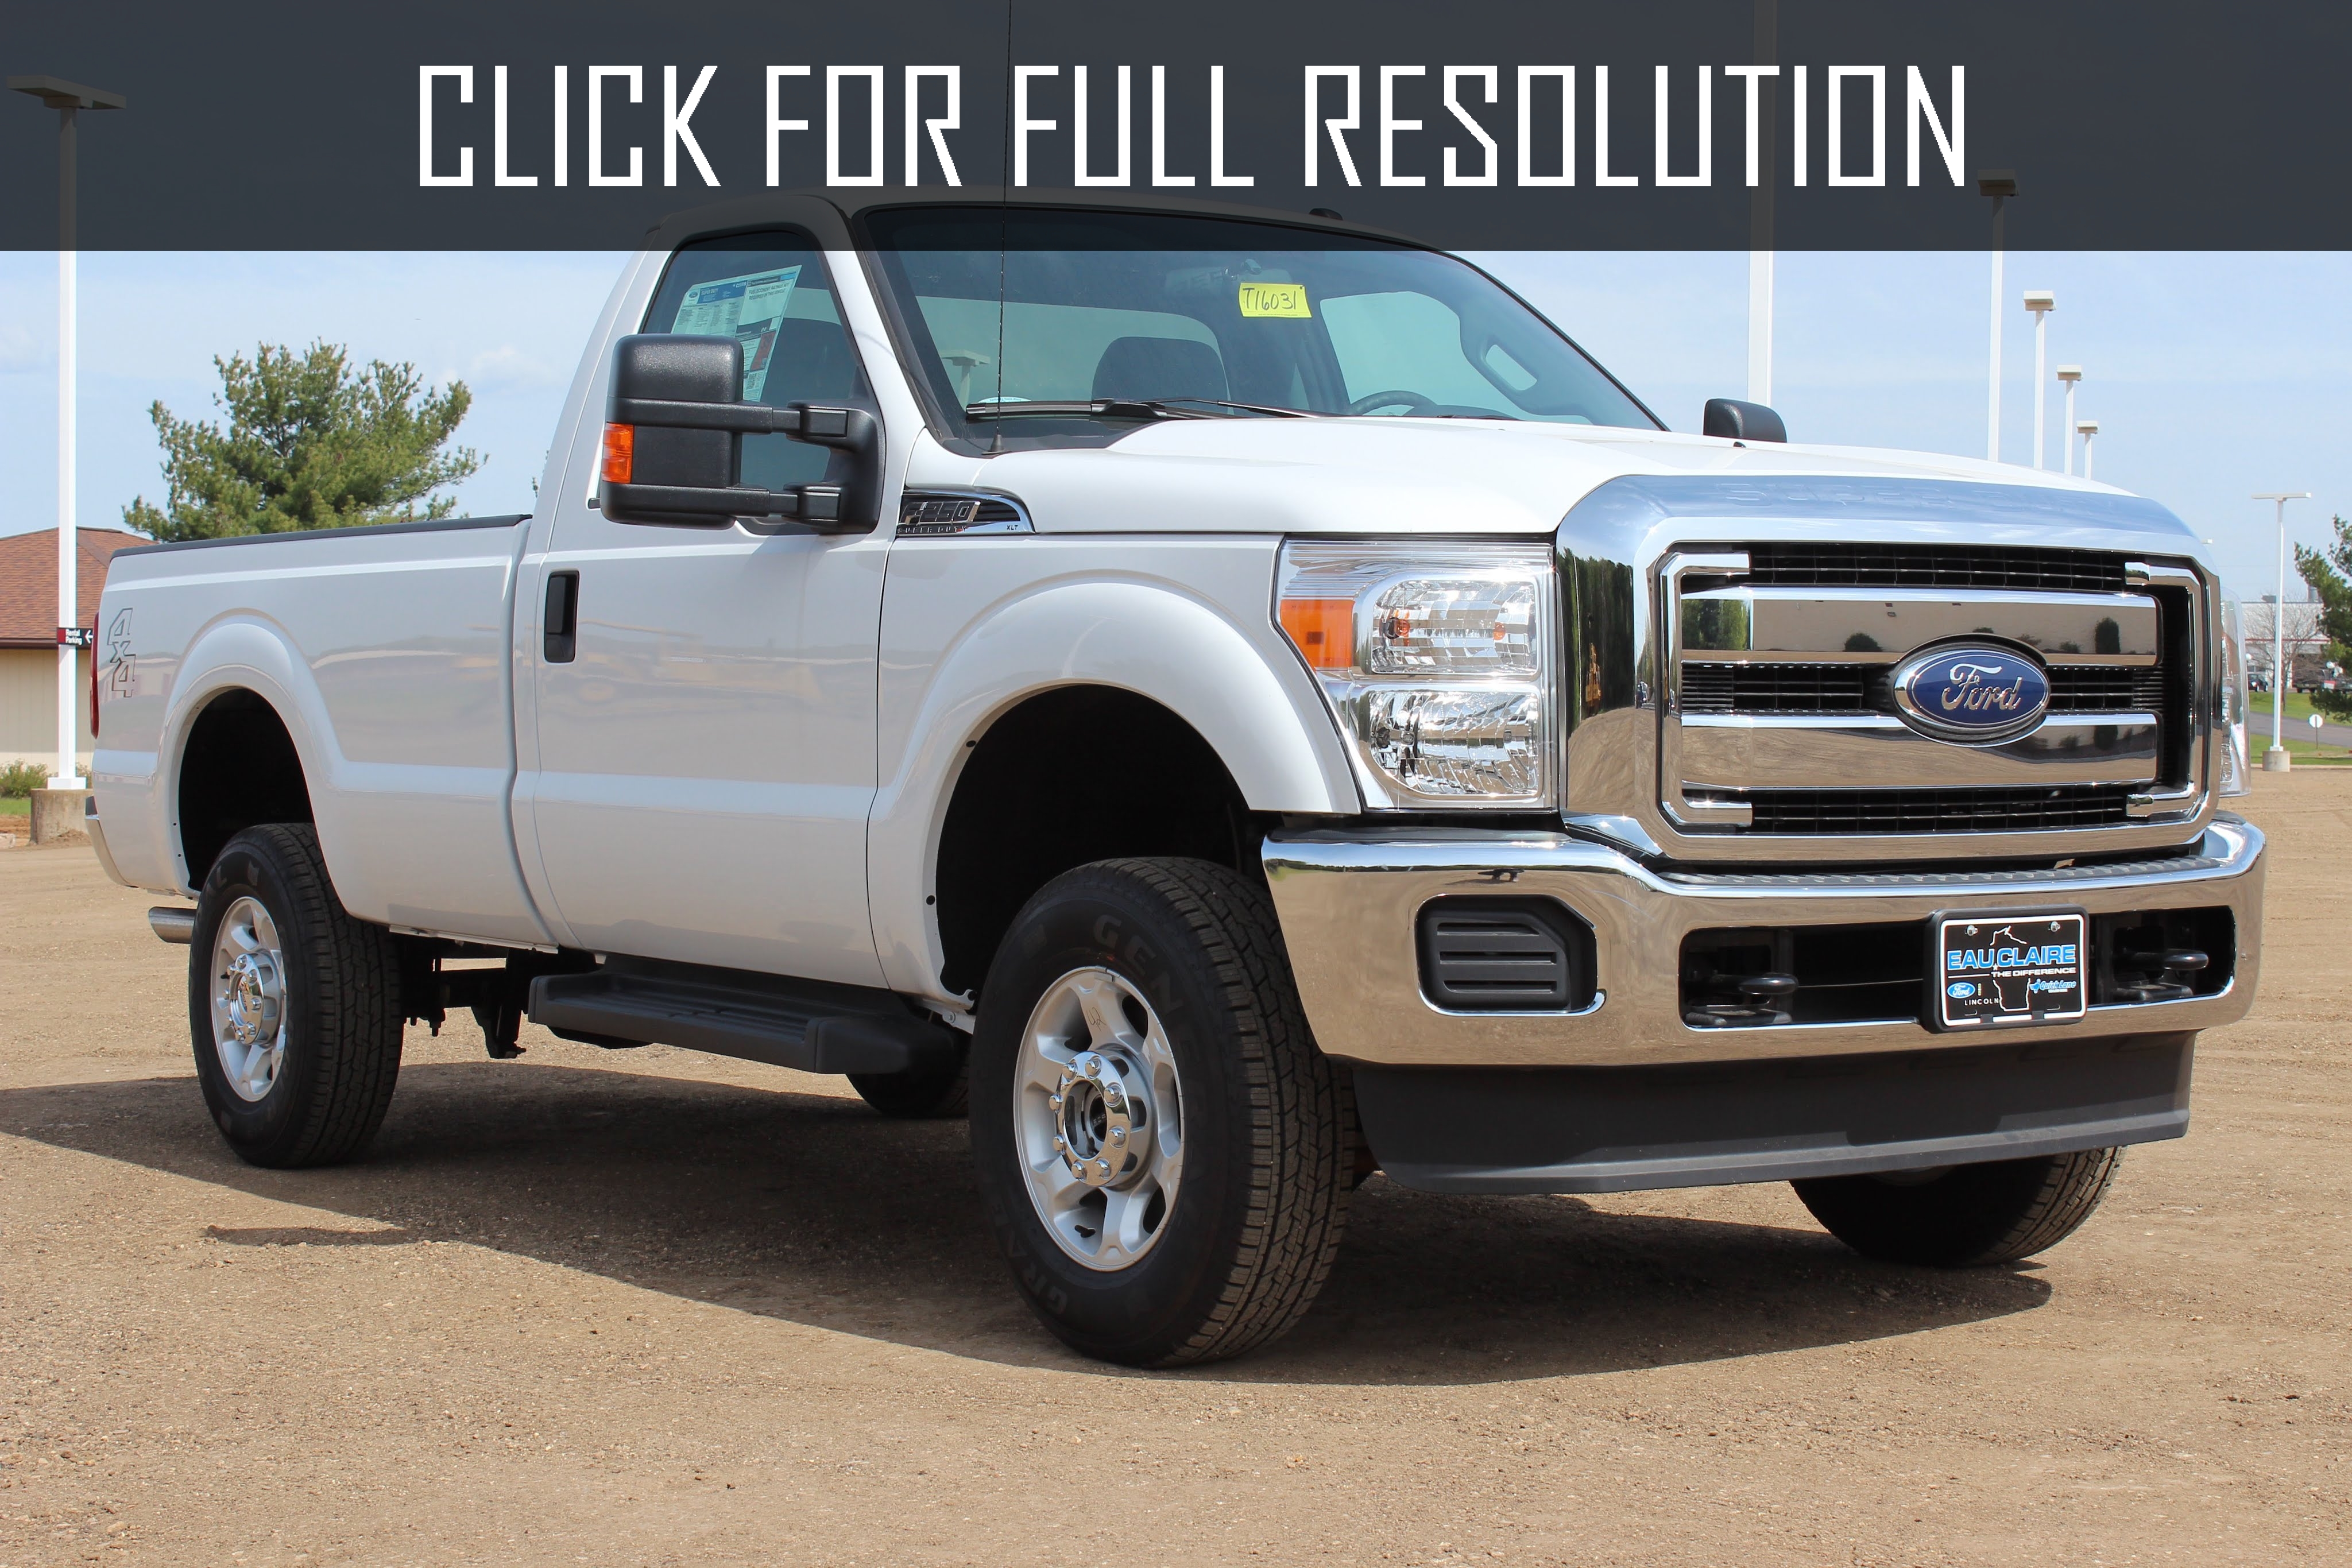 Ford Super Duty Regular Cab amazing photo gallery, some information